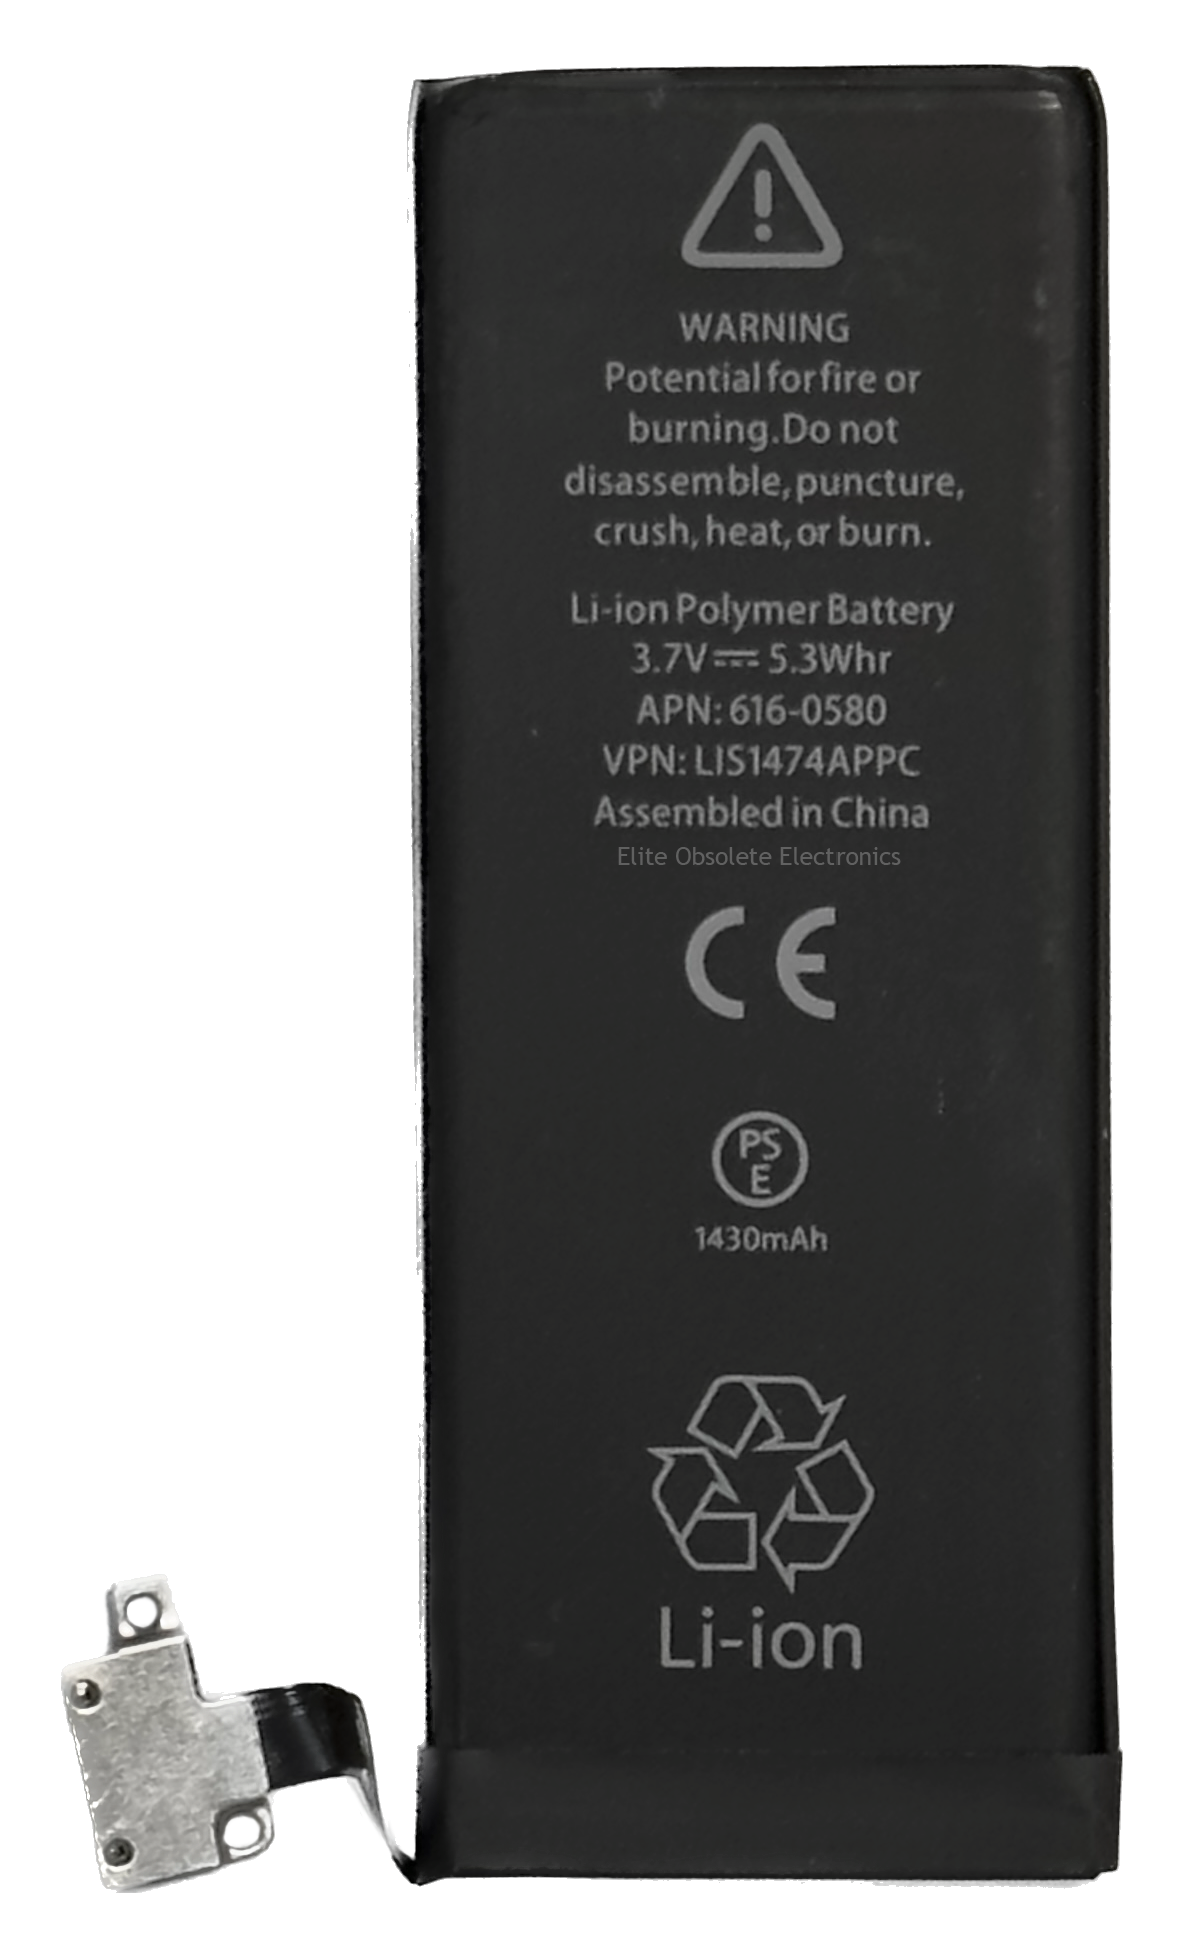 New 1430mah Lithium-Ion Polymer Battery for Apple iPhone 4S A1387